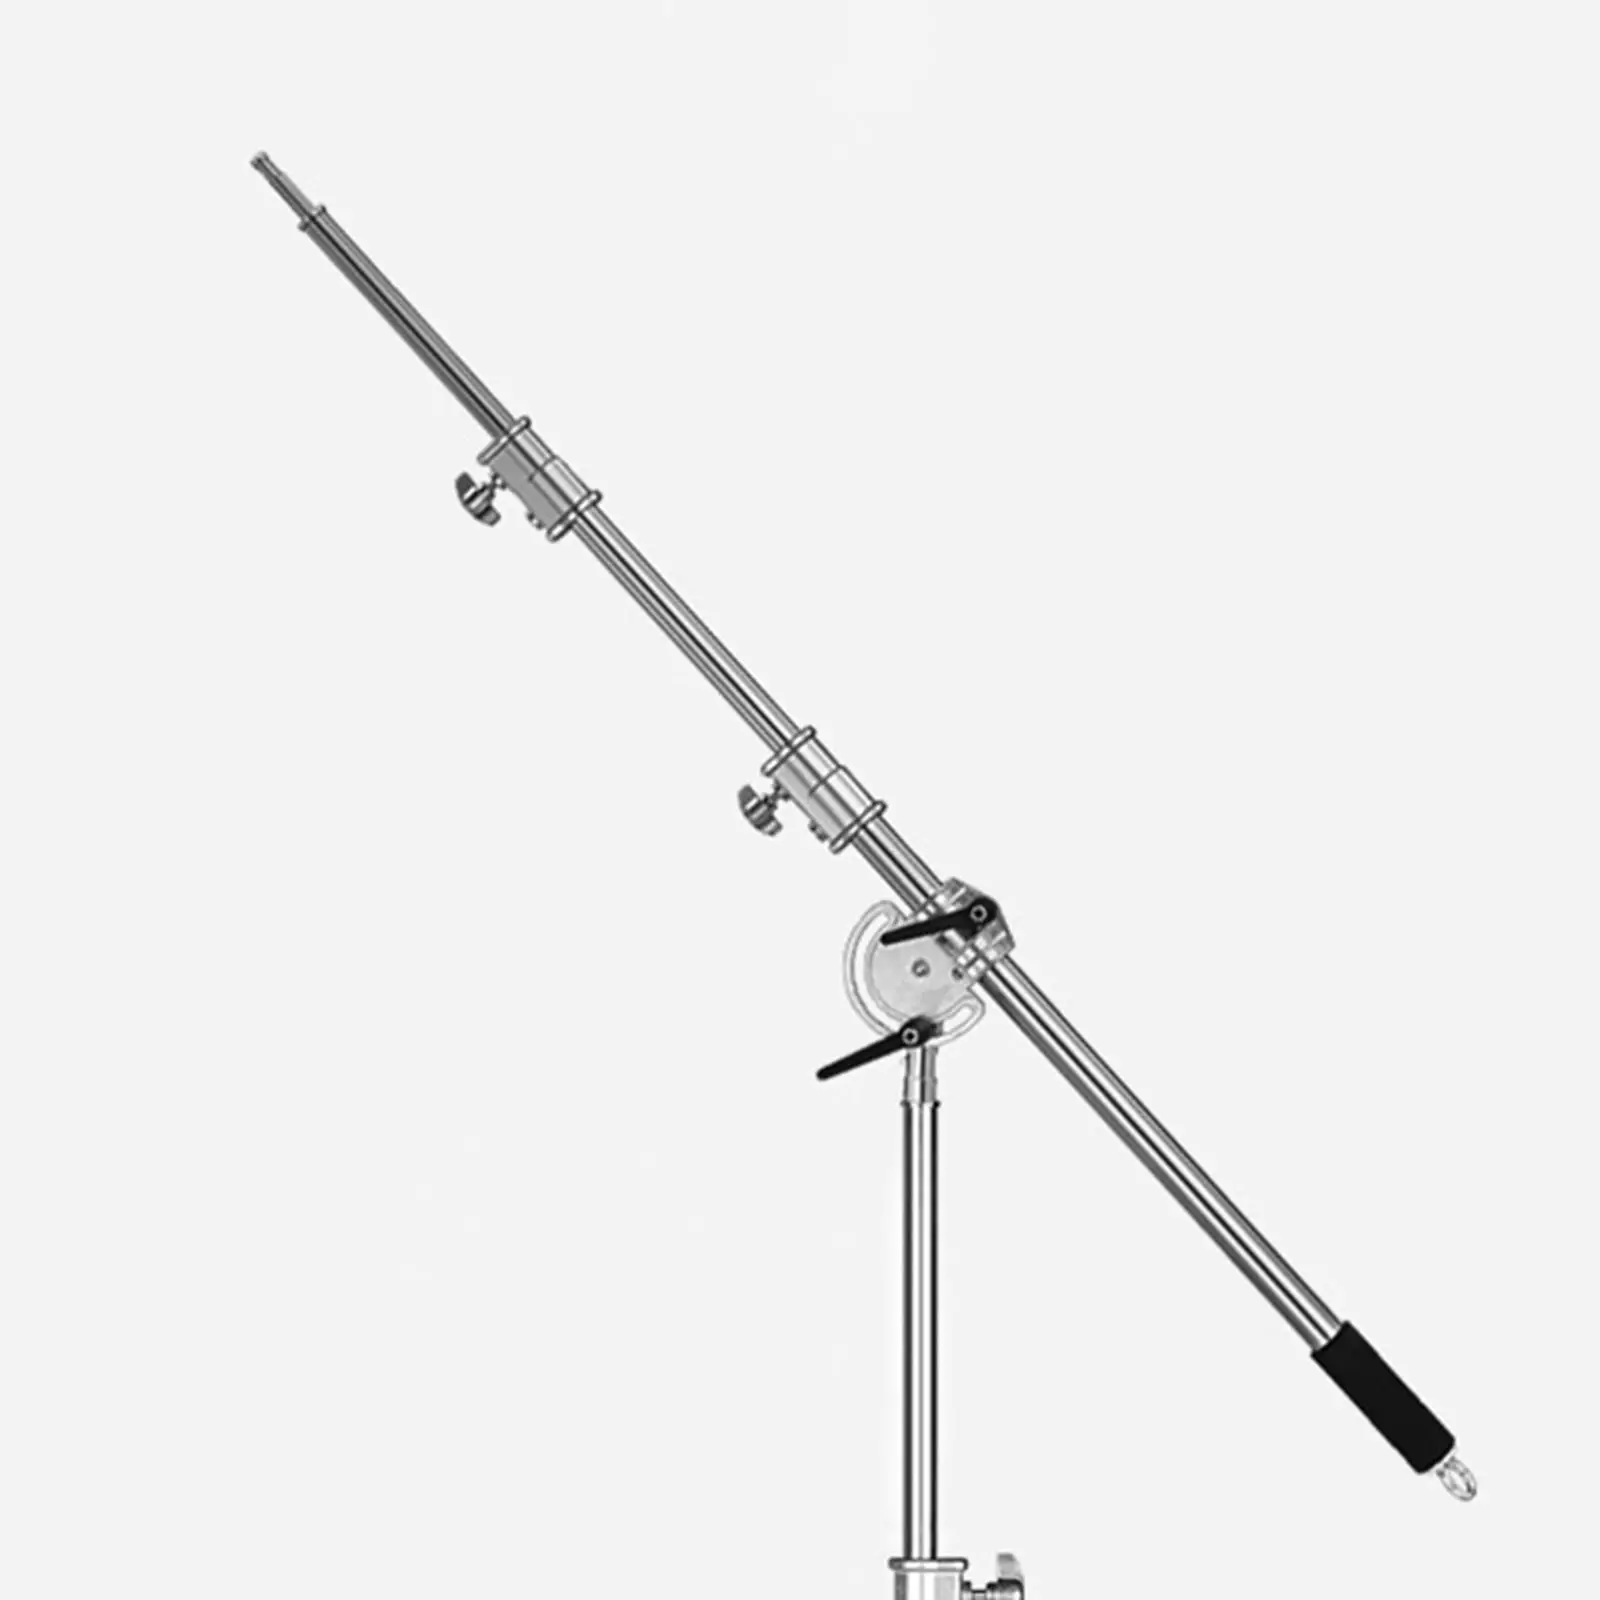 Extendable Photo Studio Boom Arm Length Adjustable Light Stand Long Crossbar Arm for Portrait Photography Weight Sand Bag Strobe